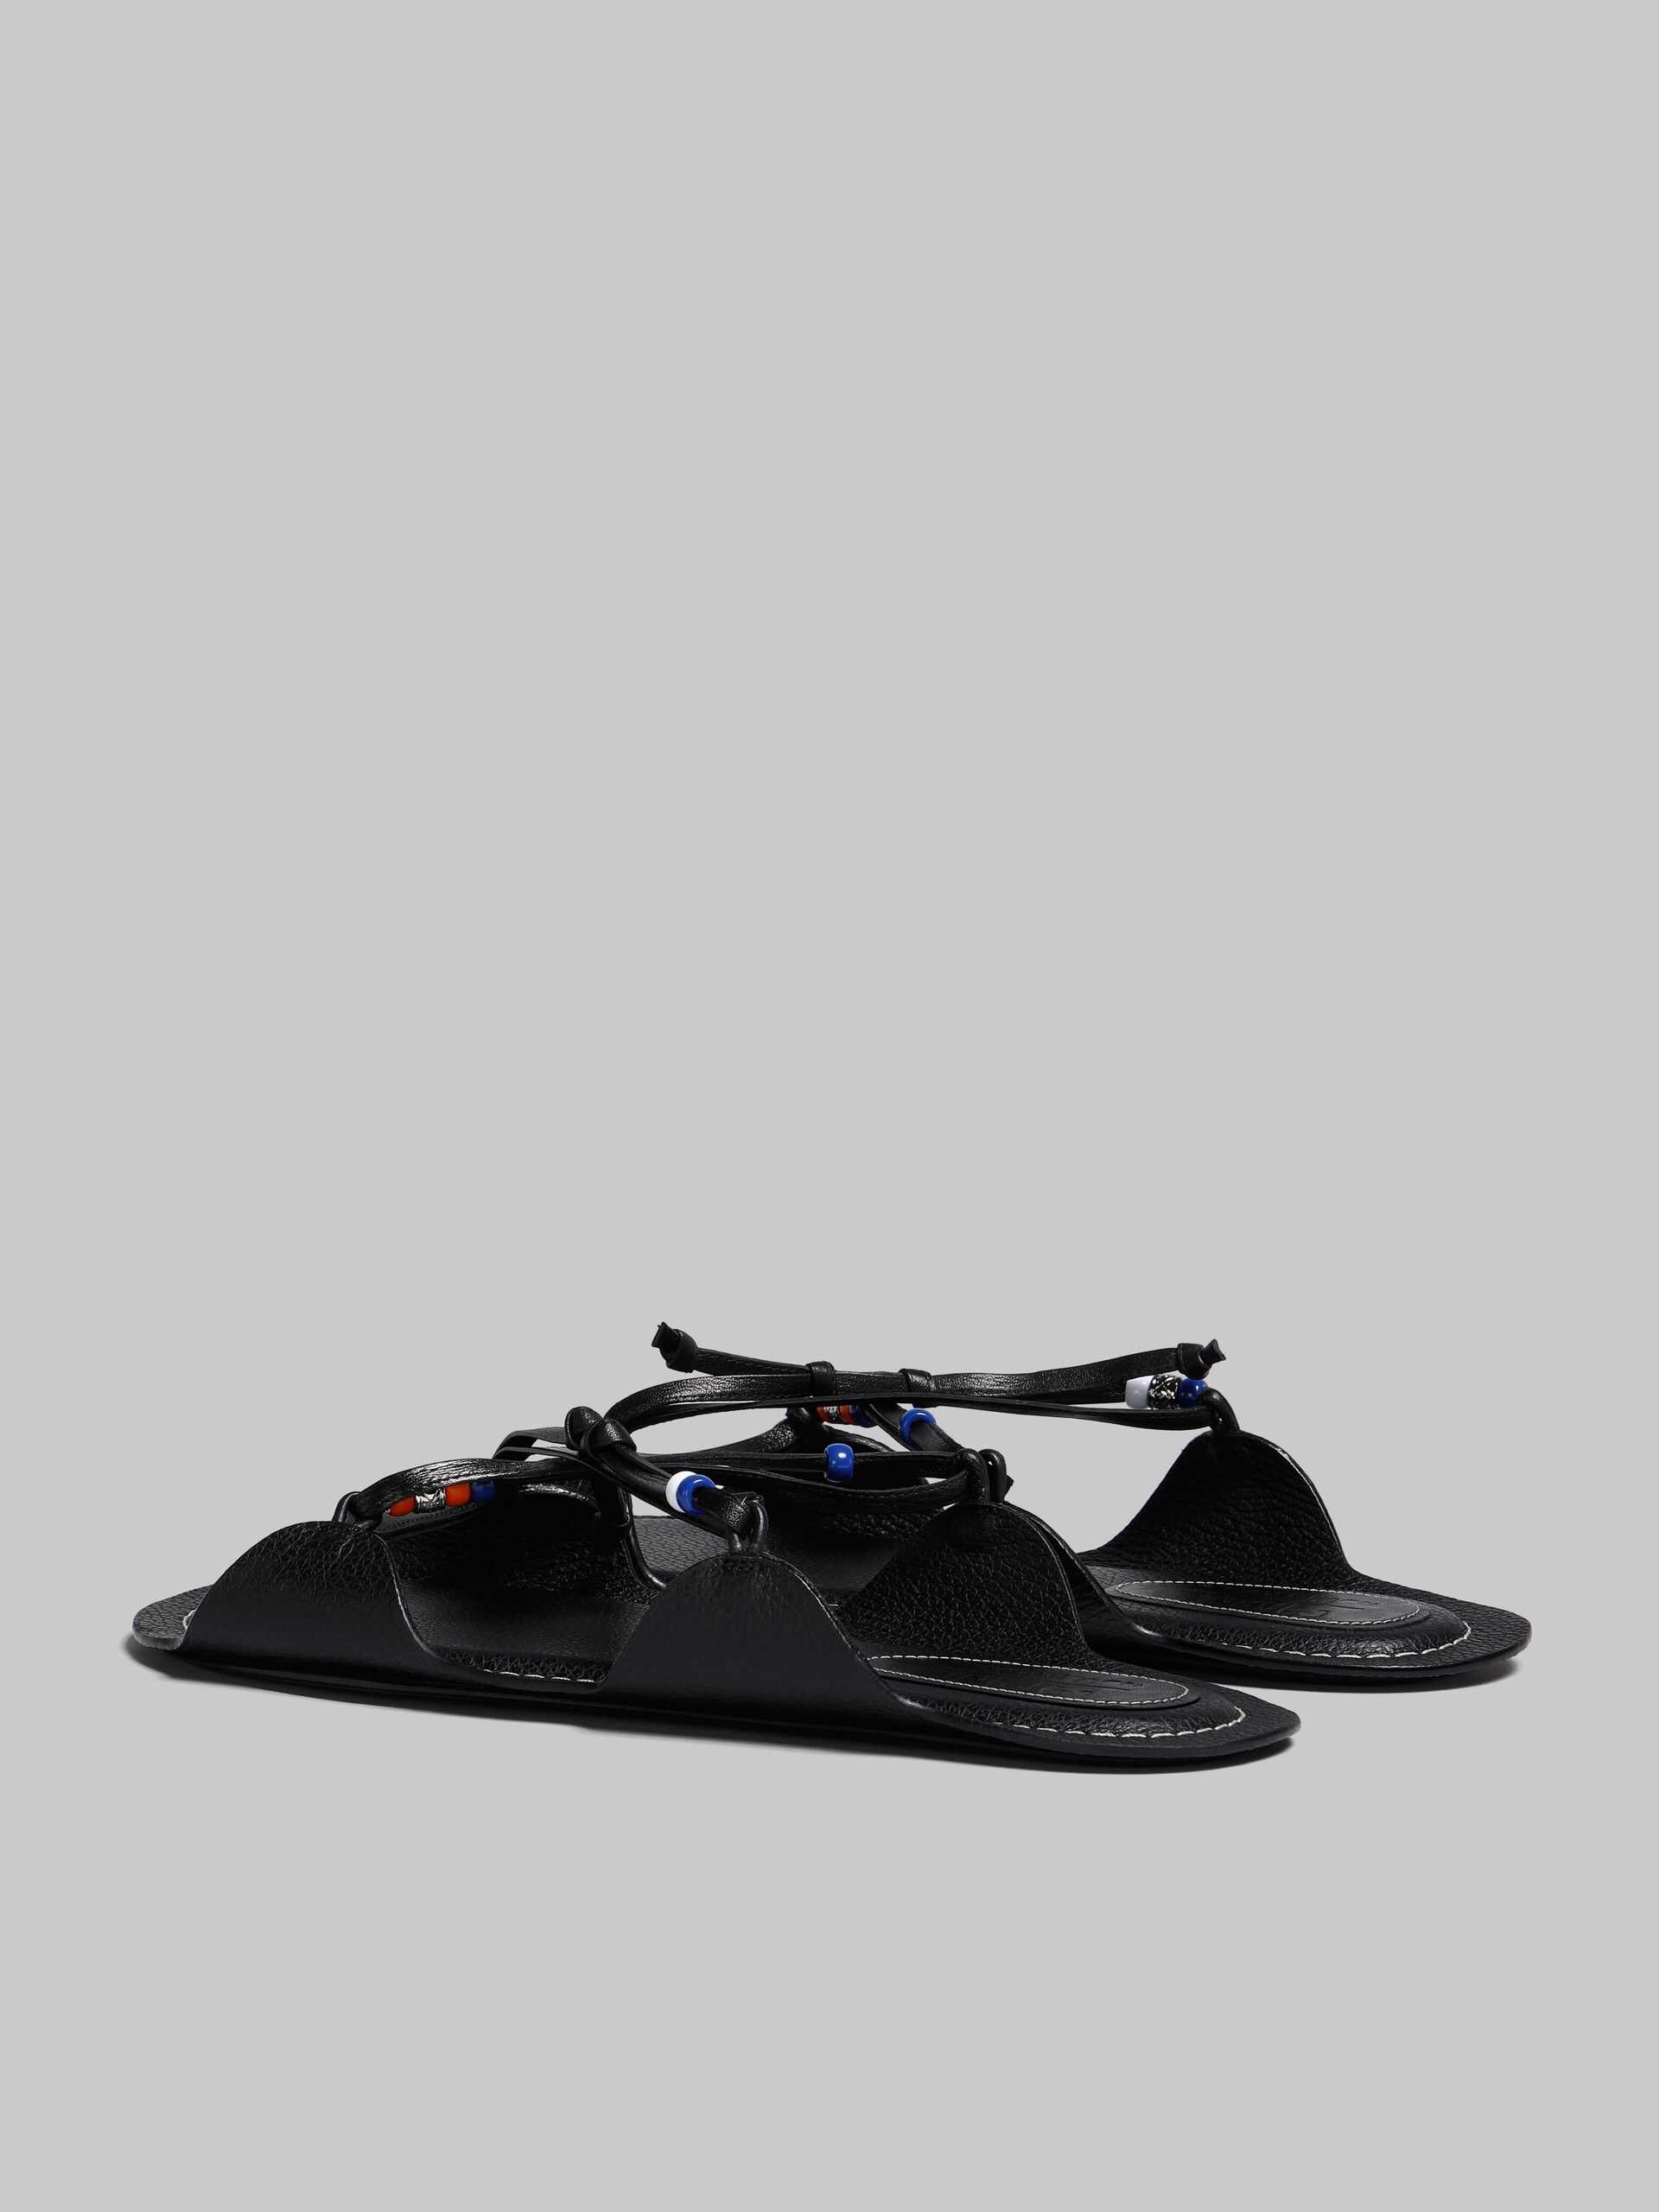 Marni x No Vacancy Inn - Black leather sandals with beads - Sandals - Image 3